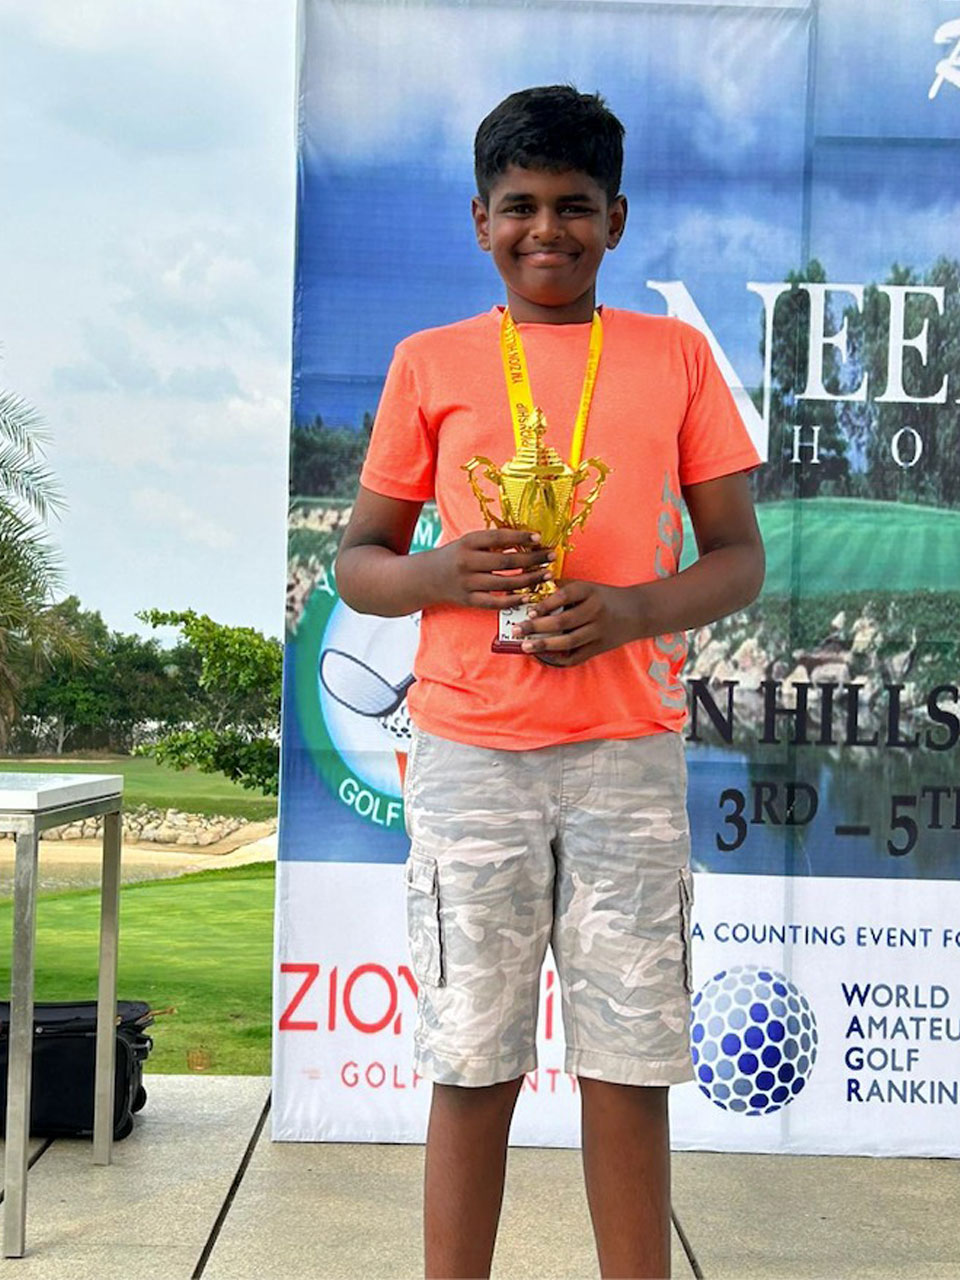 S. Nandan finishes 3rd in the Young Masters WAGR tournament